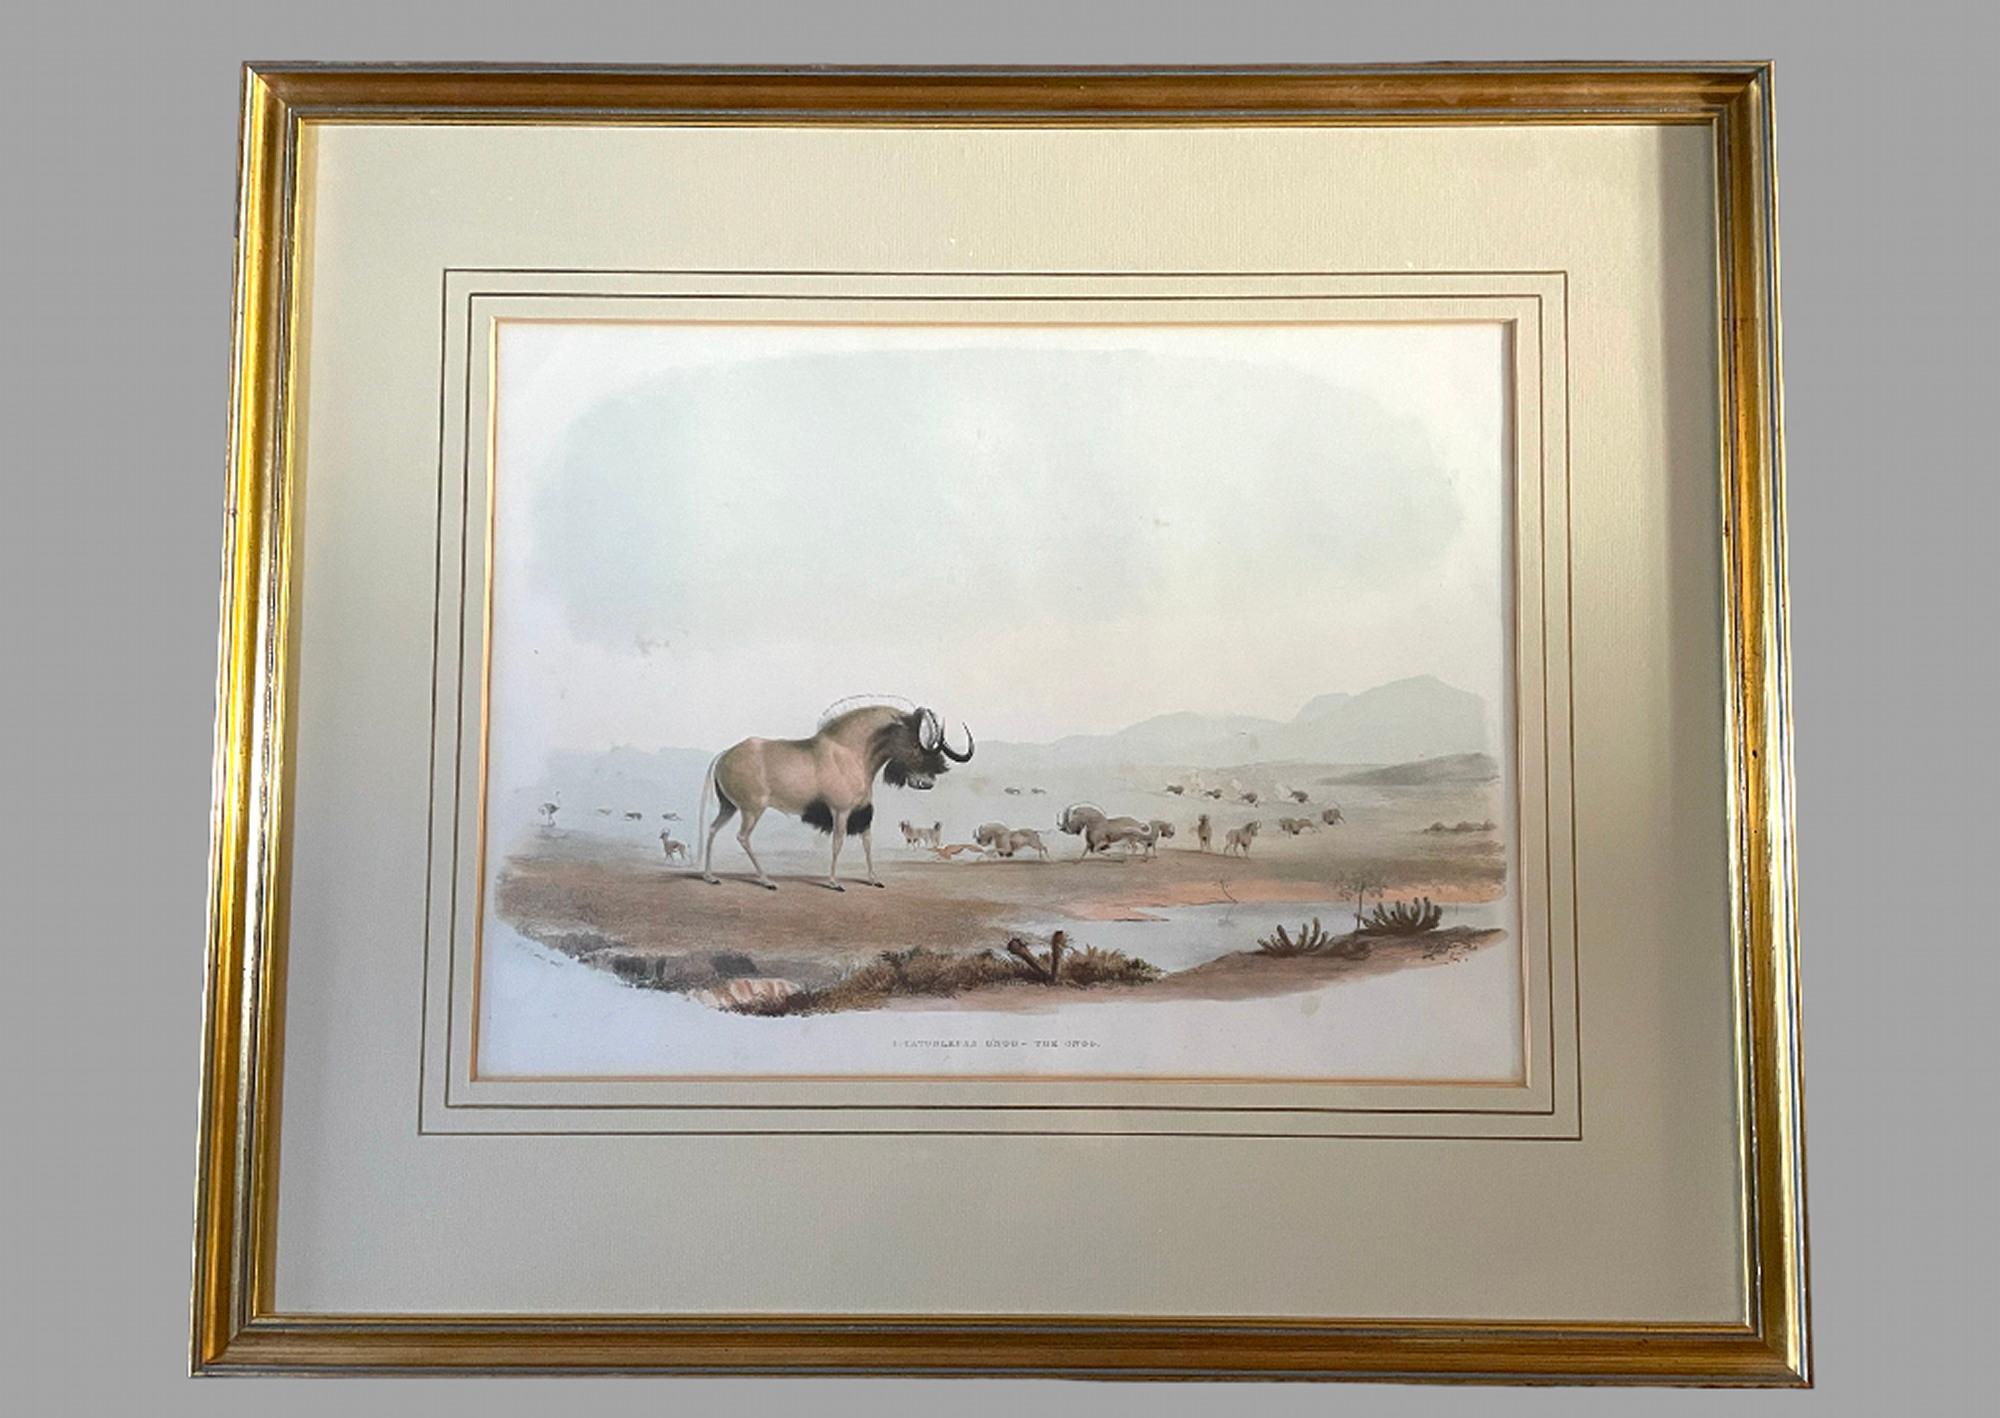 Paper Rare Set of 24 Framed Lithographs of Game and Wild Animals